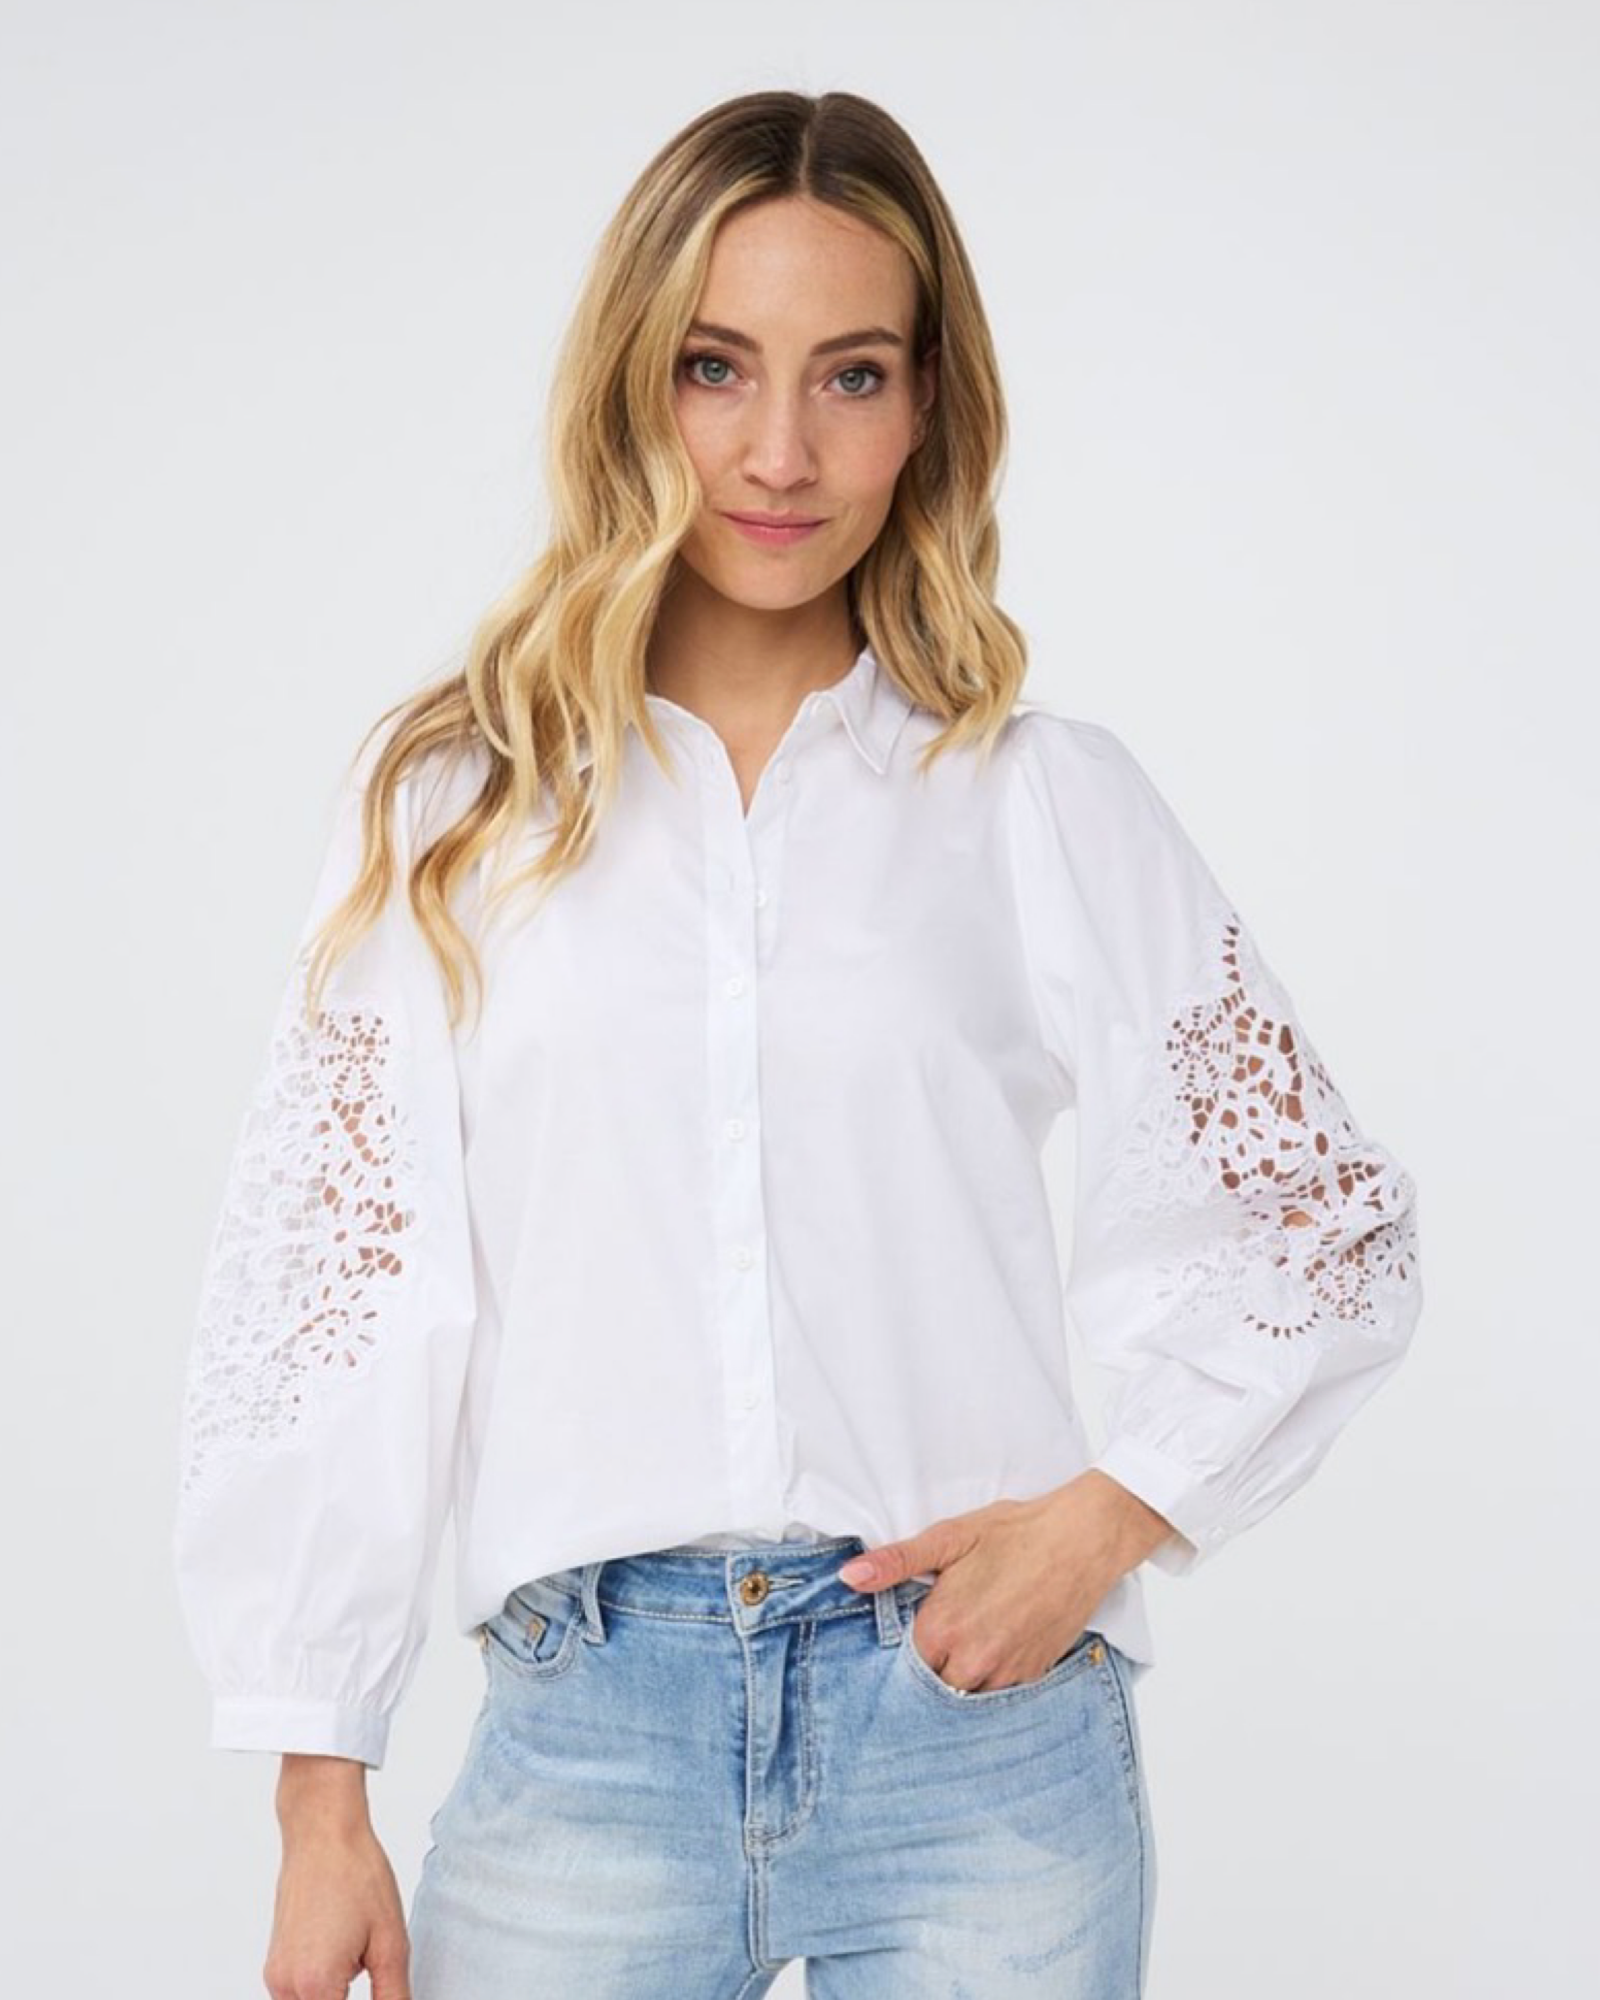 Lace sleeves shirt blouse